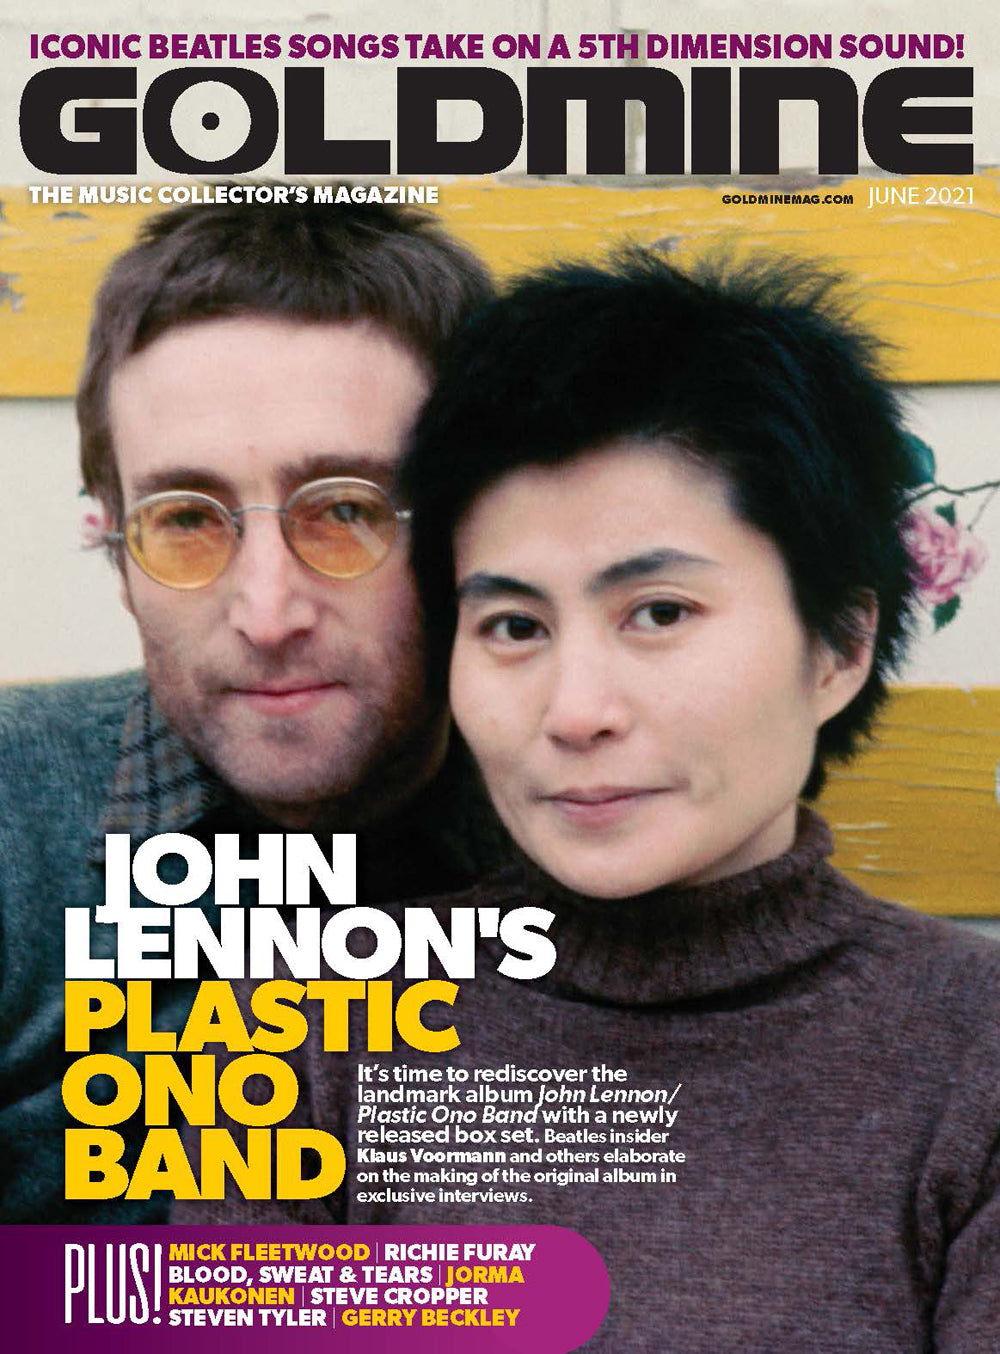 GOLDMINE MAGAZINE: JULY 2021 ISSUE, FEATURING PLASTIC ONO BAND